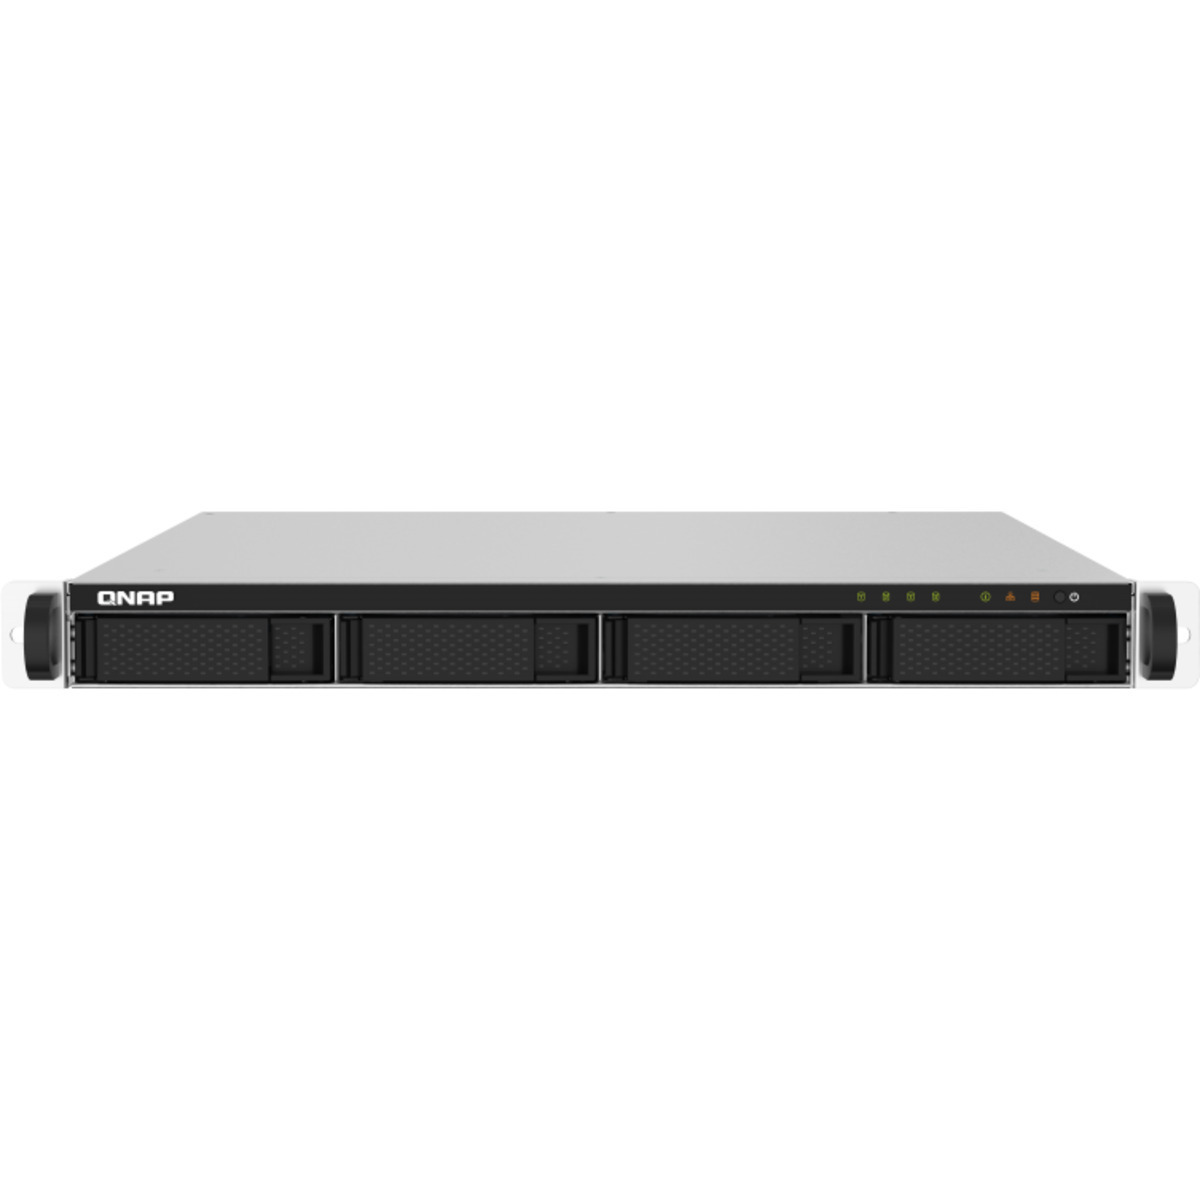 buy $4504 QNAP TS-432PXU 32tb RackMount NAS - Network Attached Storage Device 4x8000gb Samsung 870 QVO MZ-77Q8T0 2.5 SATA 6Gb/s SSD CONSUMER Class Drives Installed - Burn-In Tested - FREE RAM UPGRADE - nas headquarters buy network attached storage server device das new raid-5 free shipping usa christmas new year holiday sale TS-432PXU